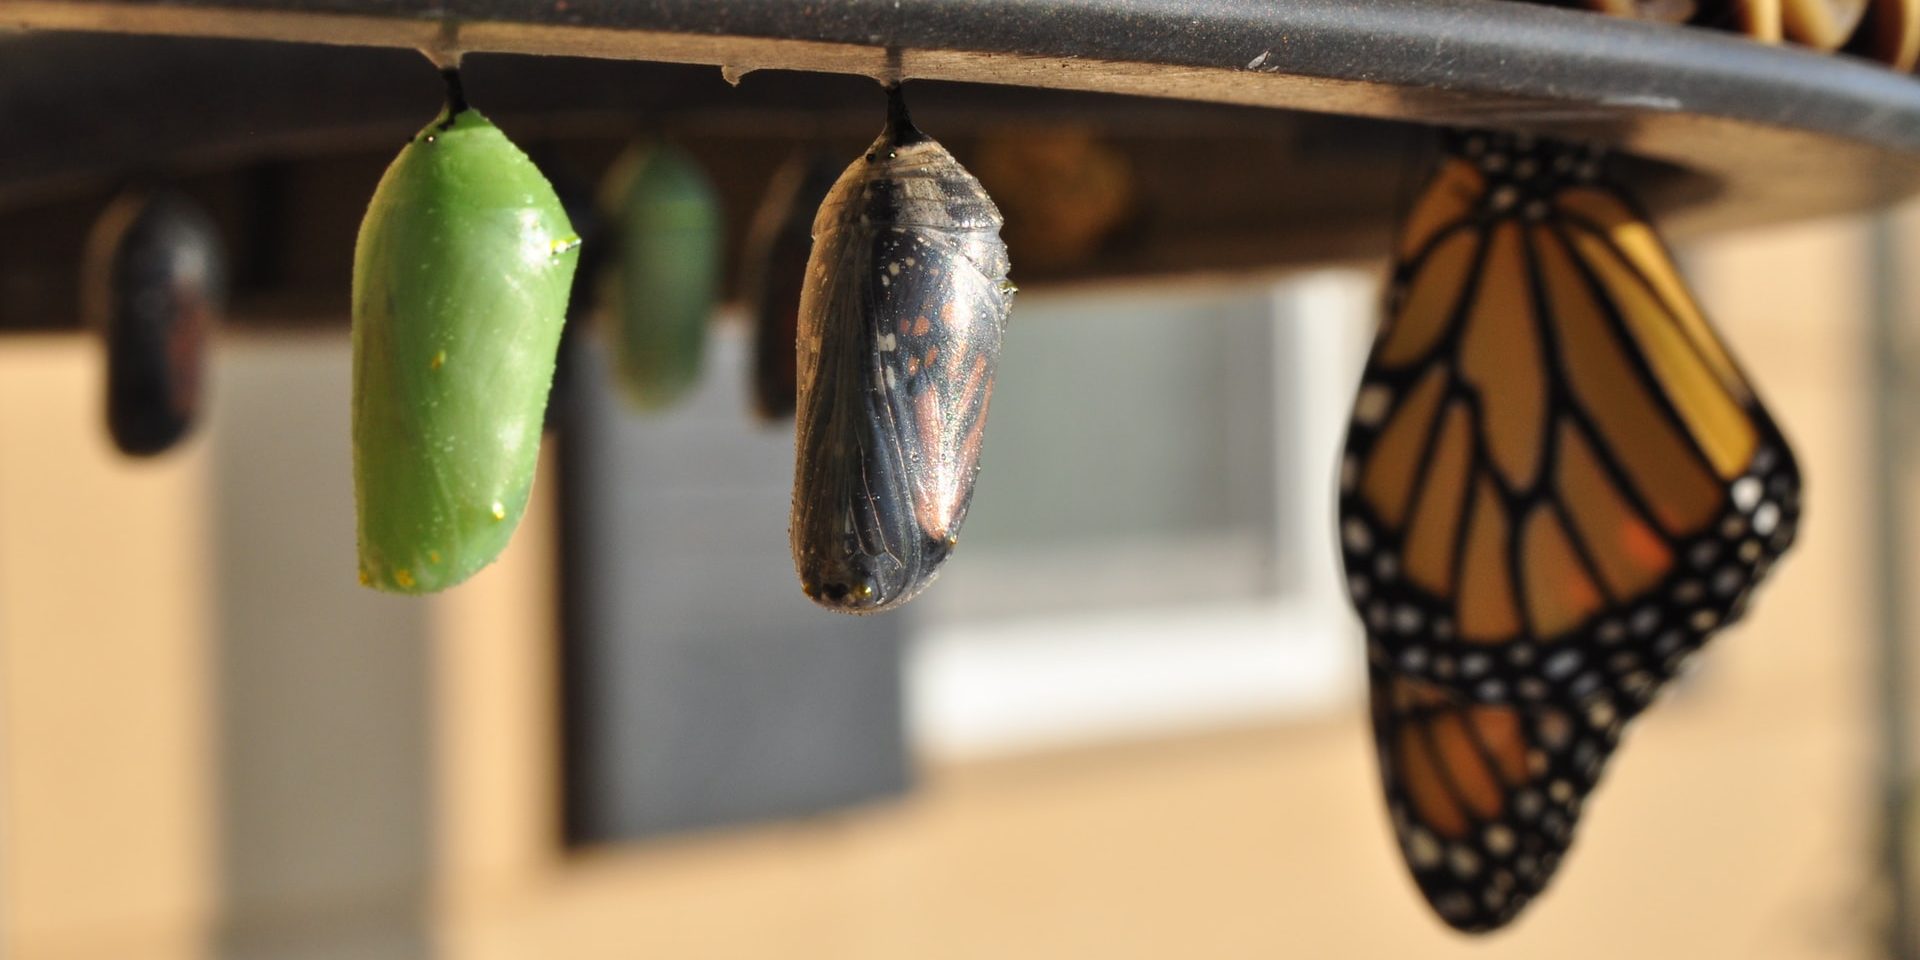 New green chrysalis coloration butterflies, one that’s about ready to emerge, and a butterfly that’s already come out